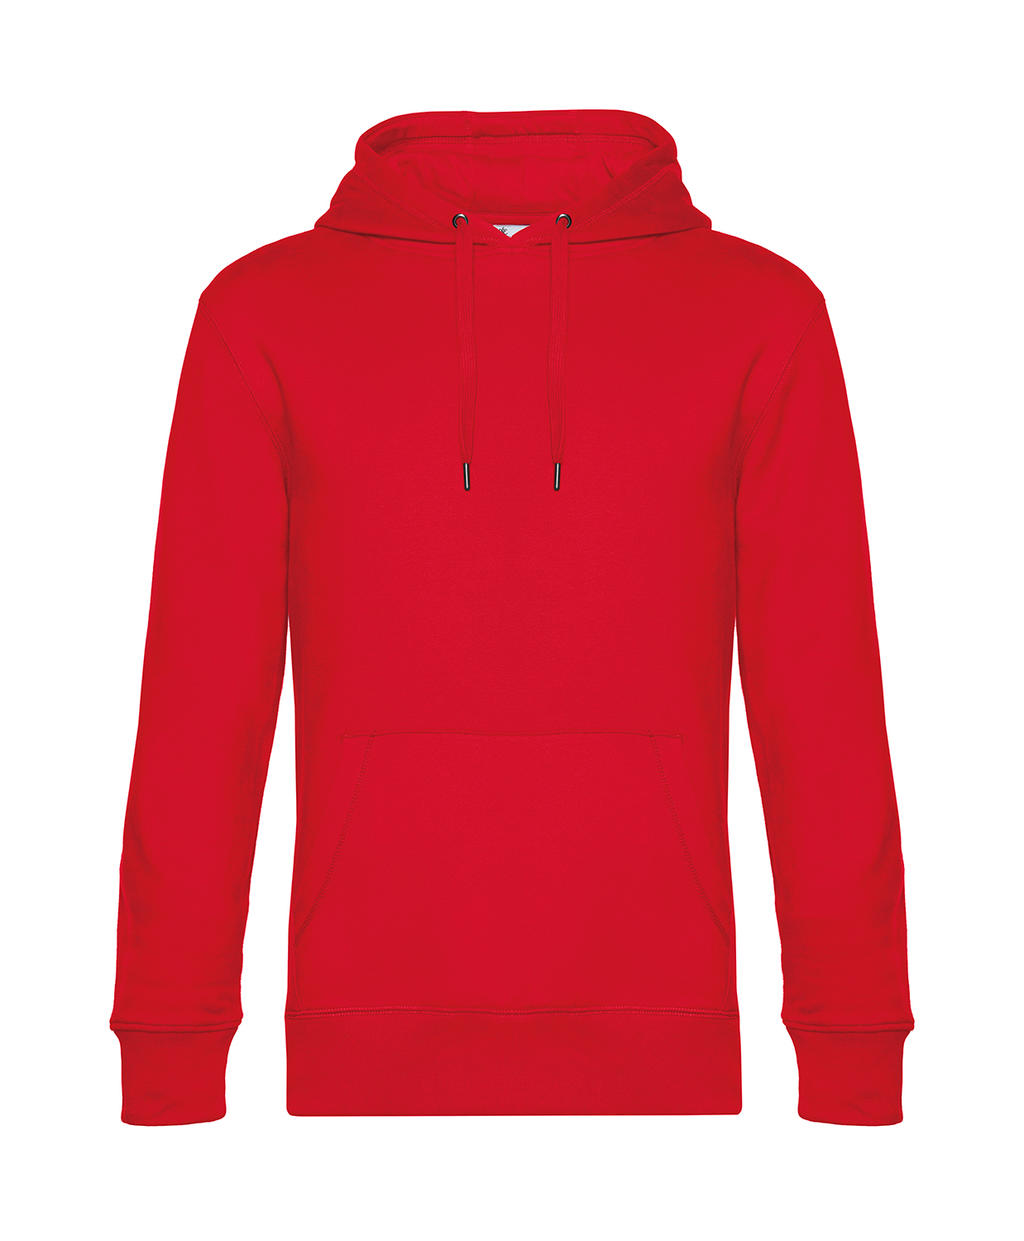 Mikina KING Hooded - red